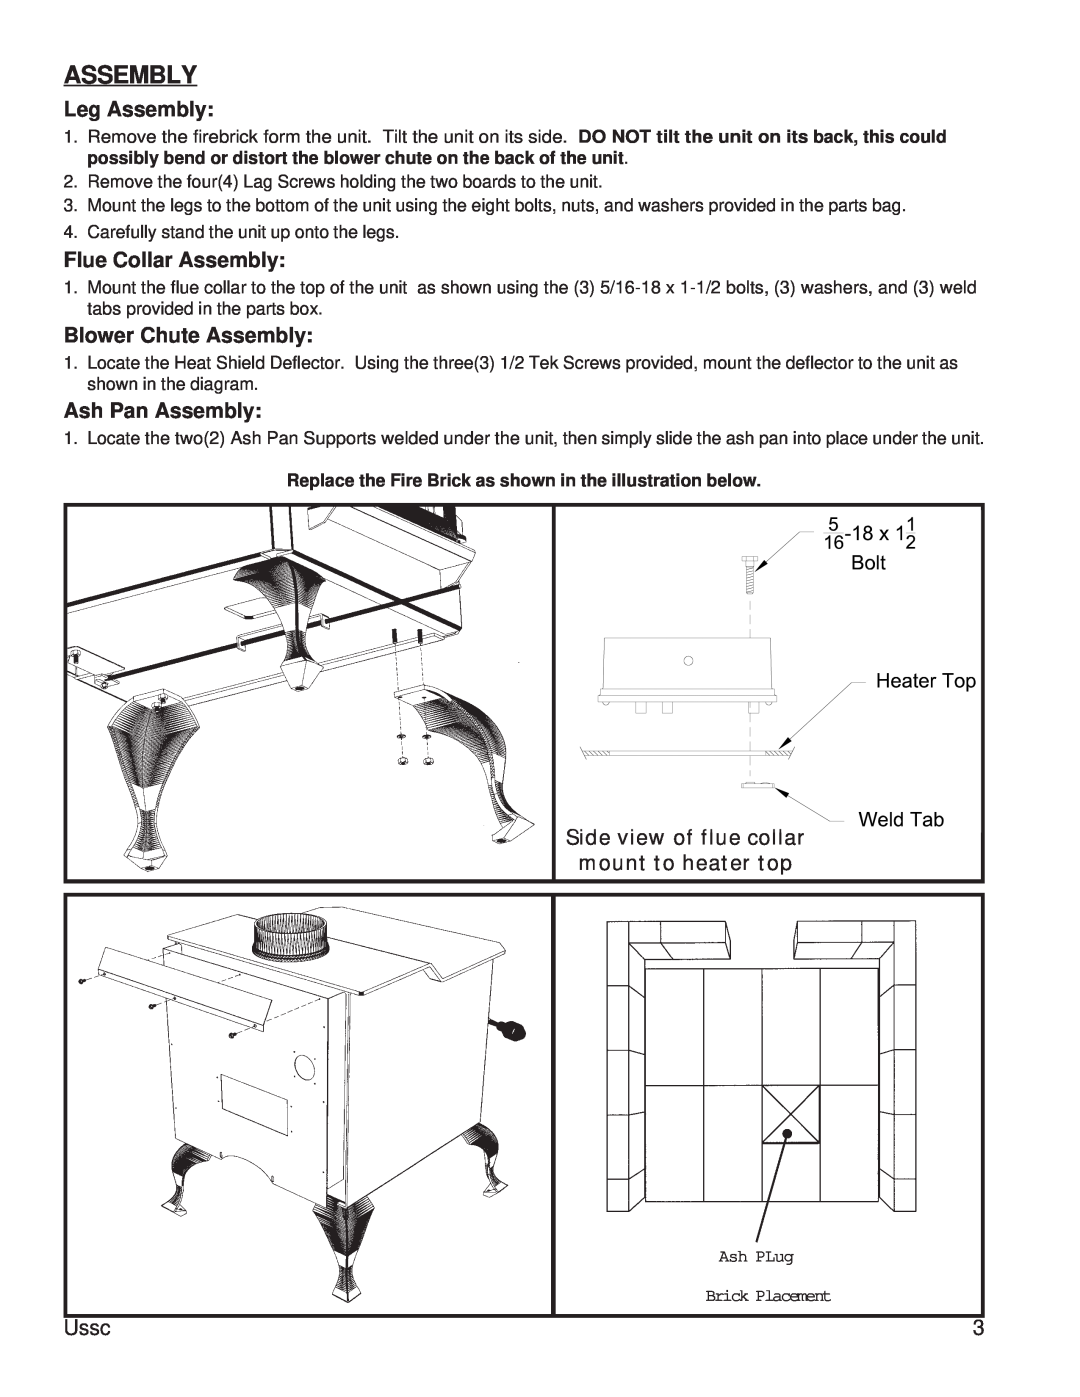 United States Stove 2015 instruction manual Leg Assembly, Flue Collar Assembly, Blower Chute Assembly, Ash Pan Assembly 